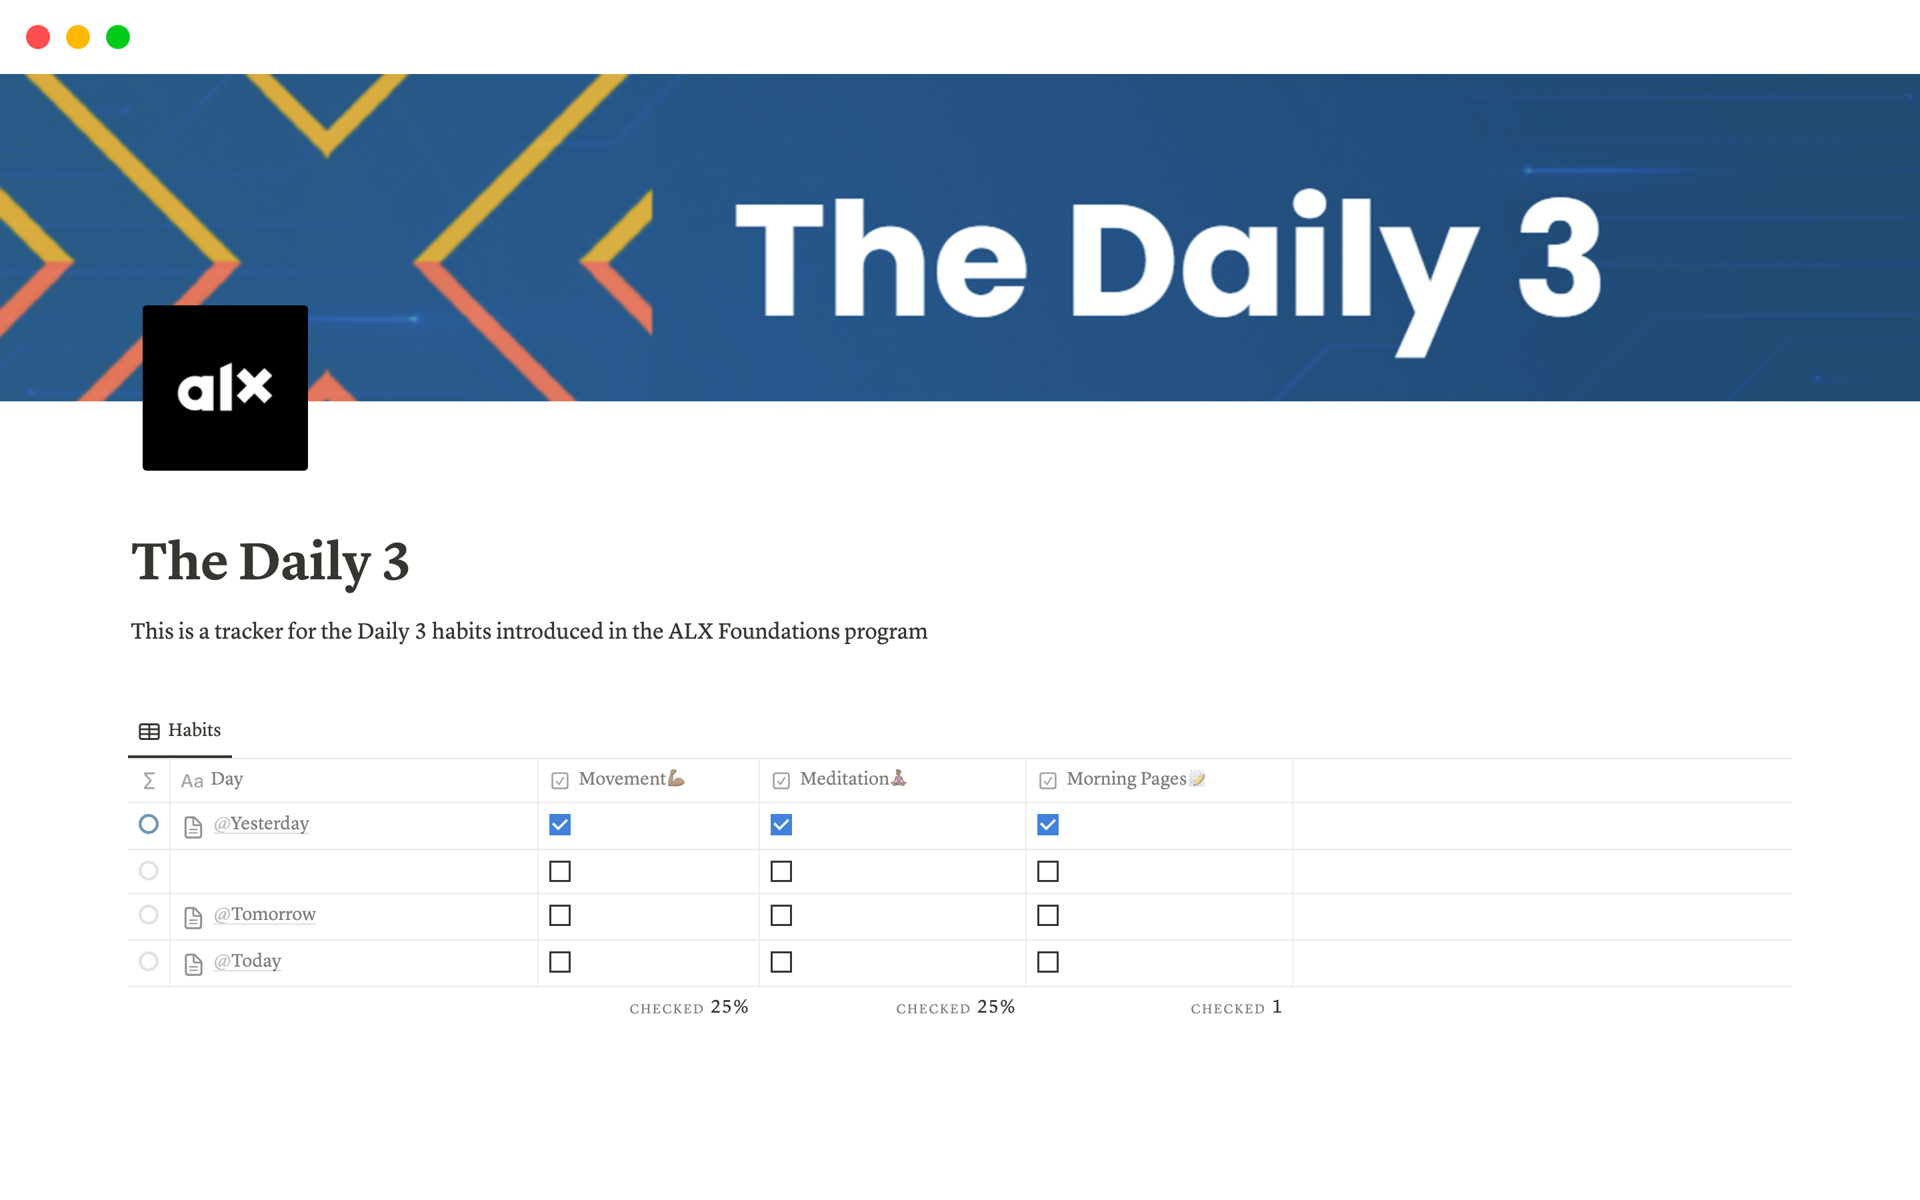 This template is a tracker to help you in tracking the three habits of the Daily 3: movement, meditation, and Morning Pages.